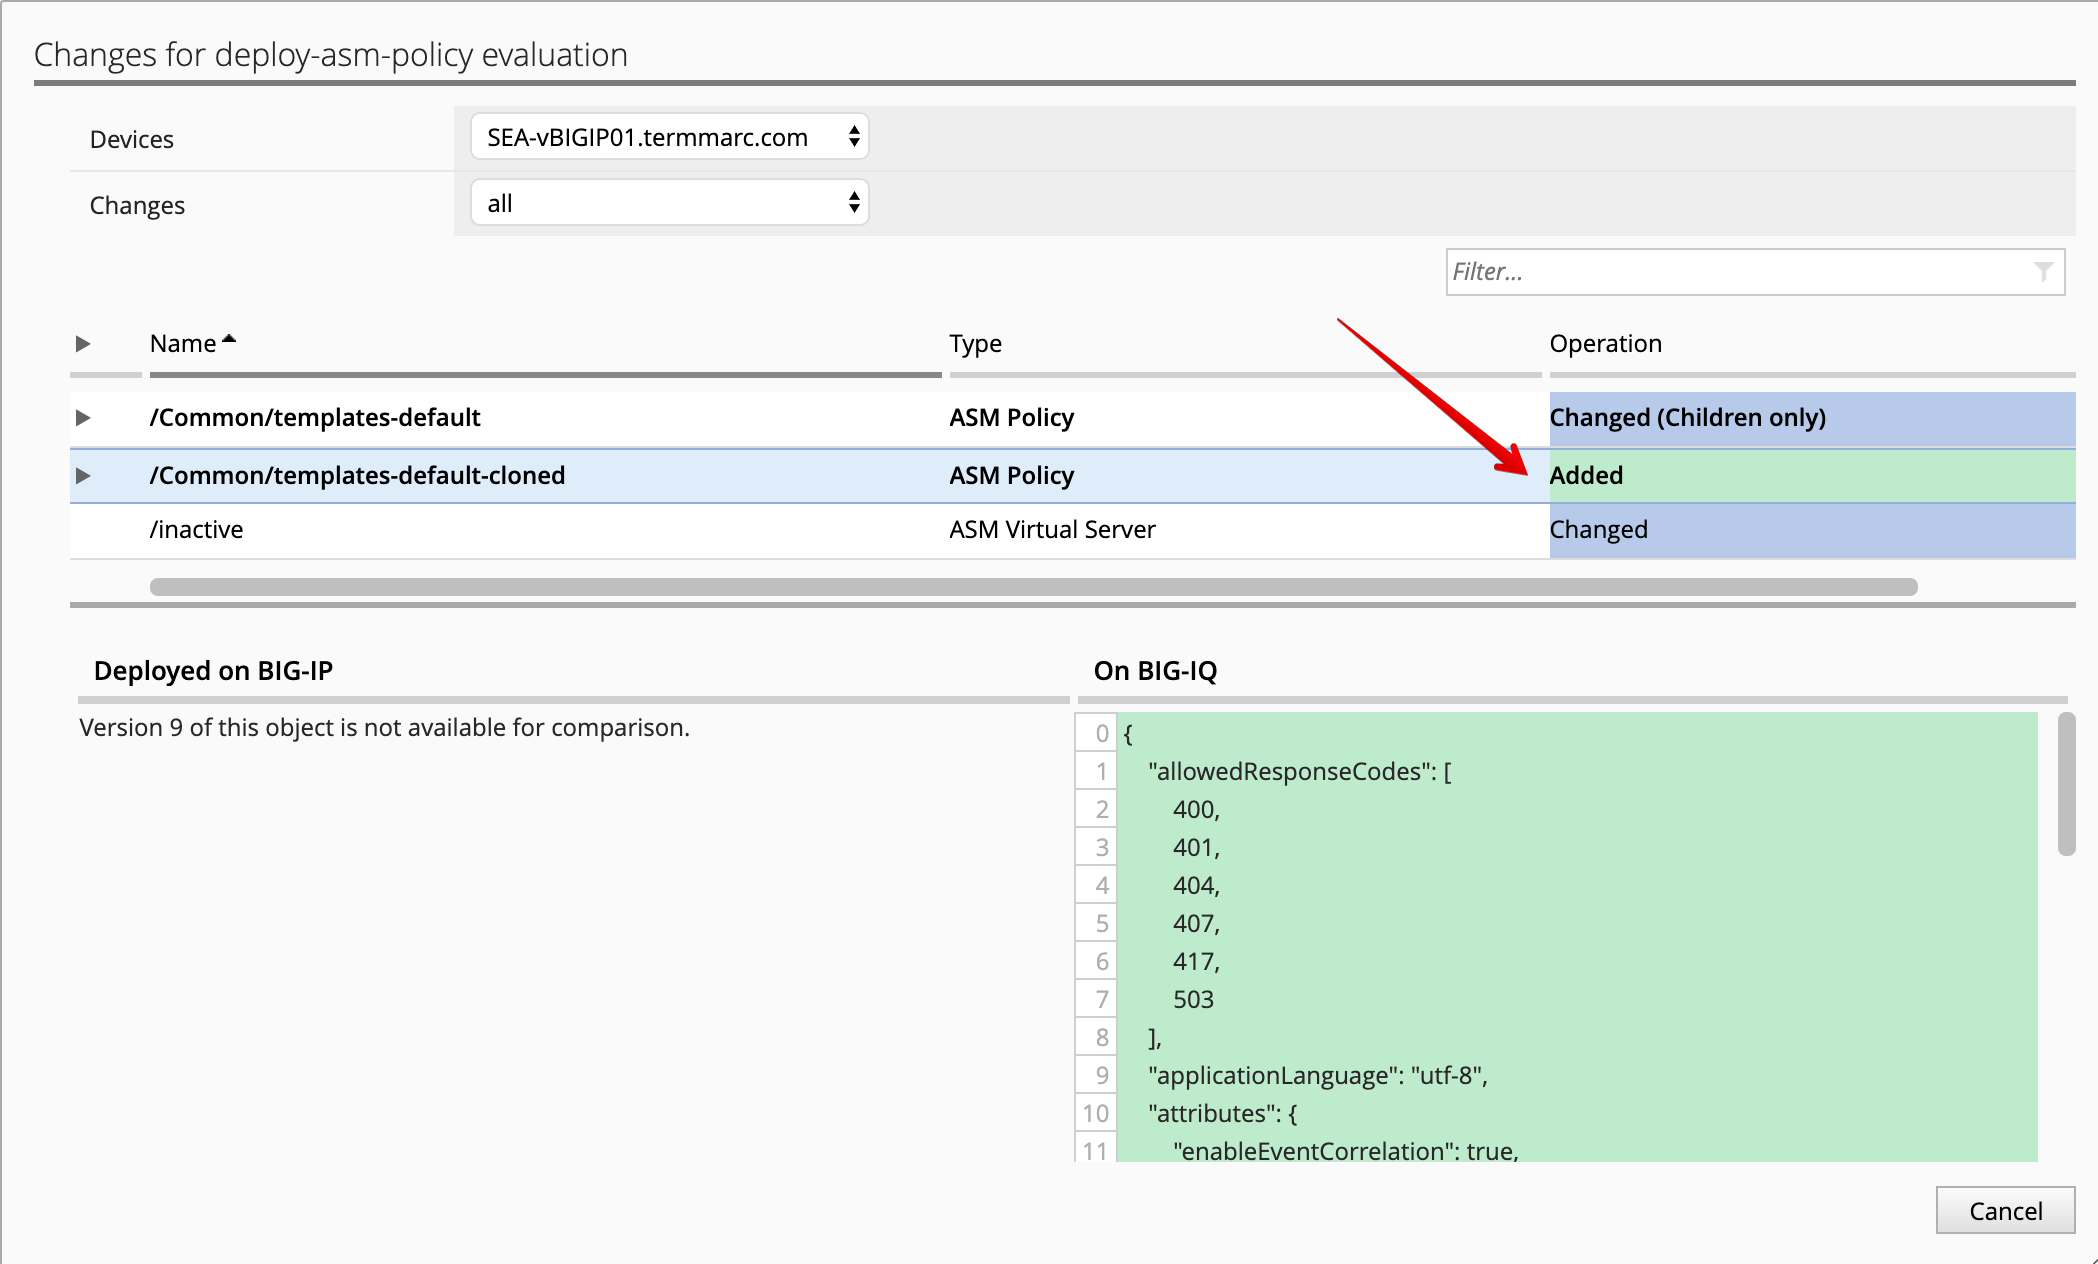 Lab 3.6: Deploy a WAF with BIG-IQ and AS3 using an ASM policy on BIG-IP ...